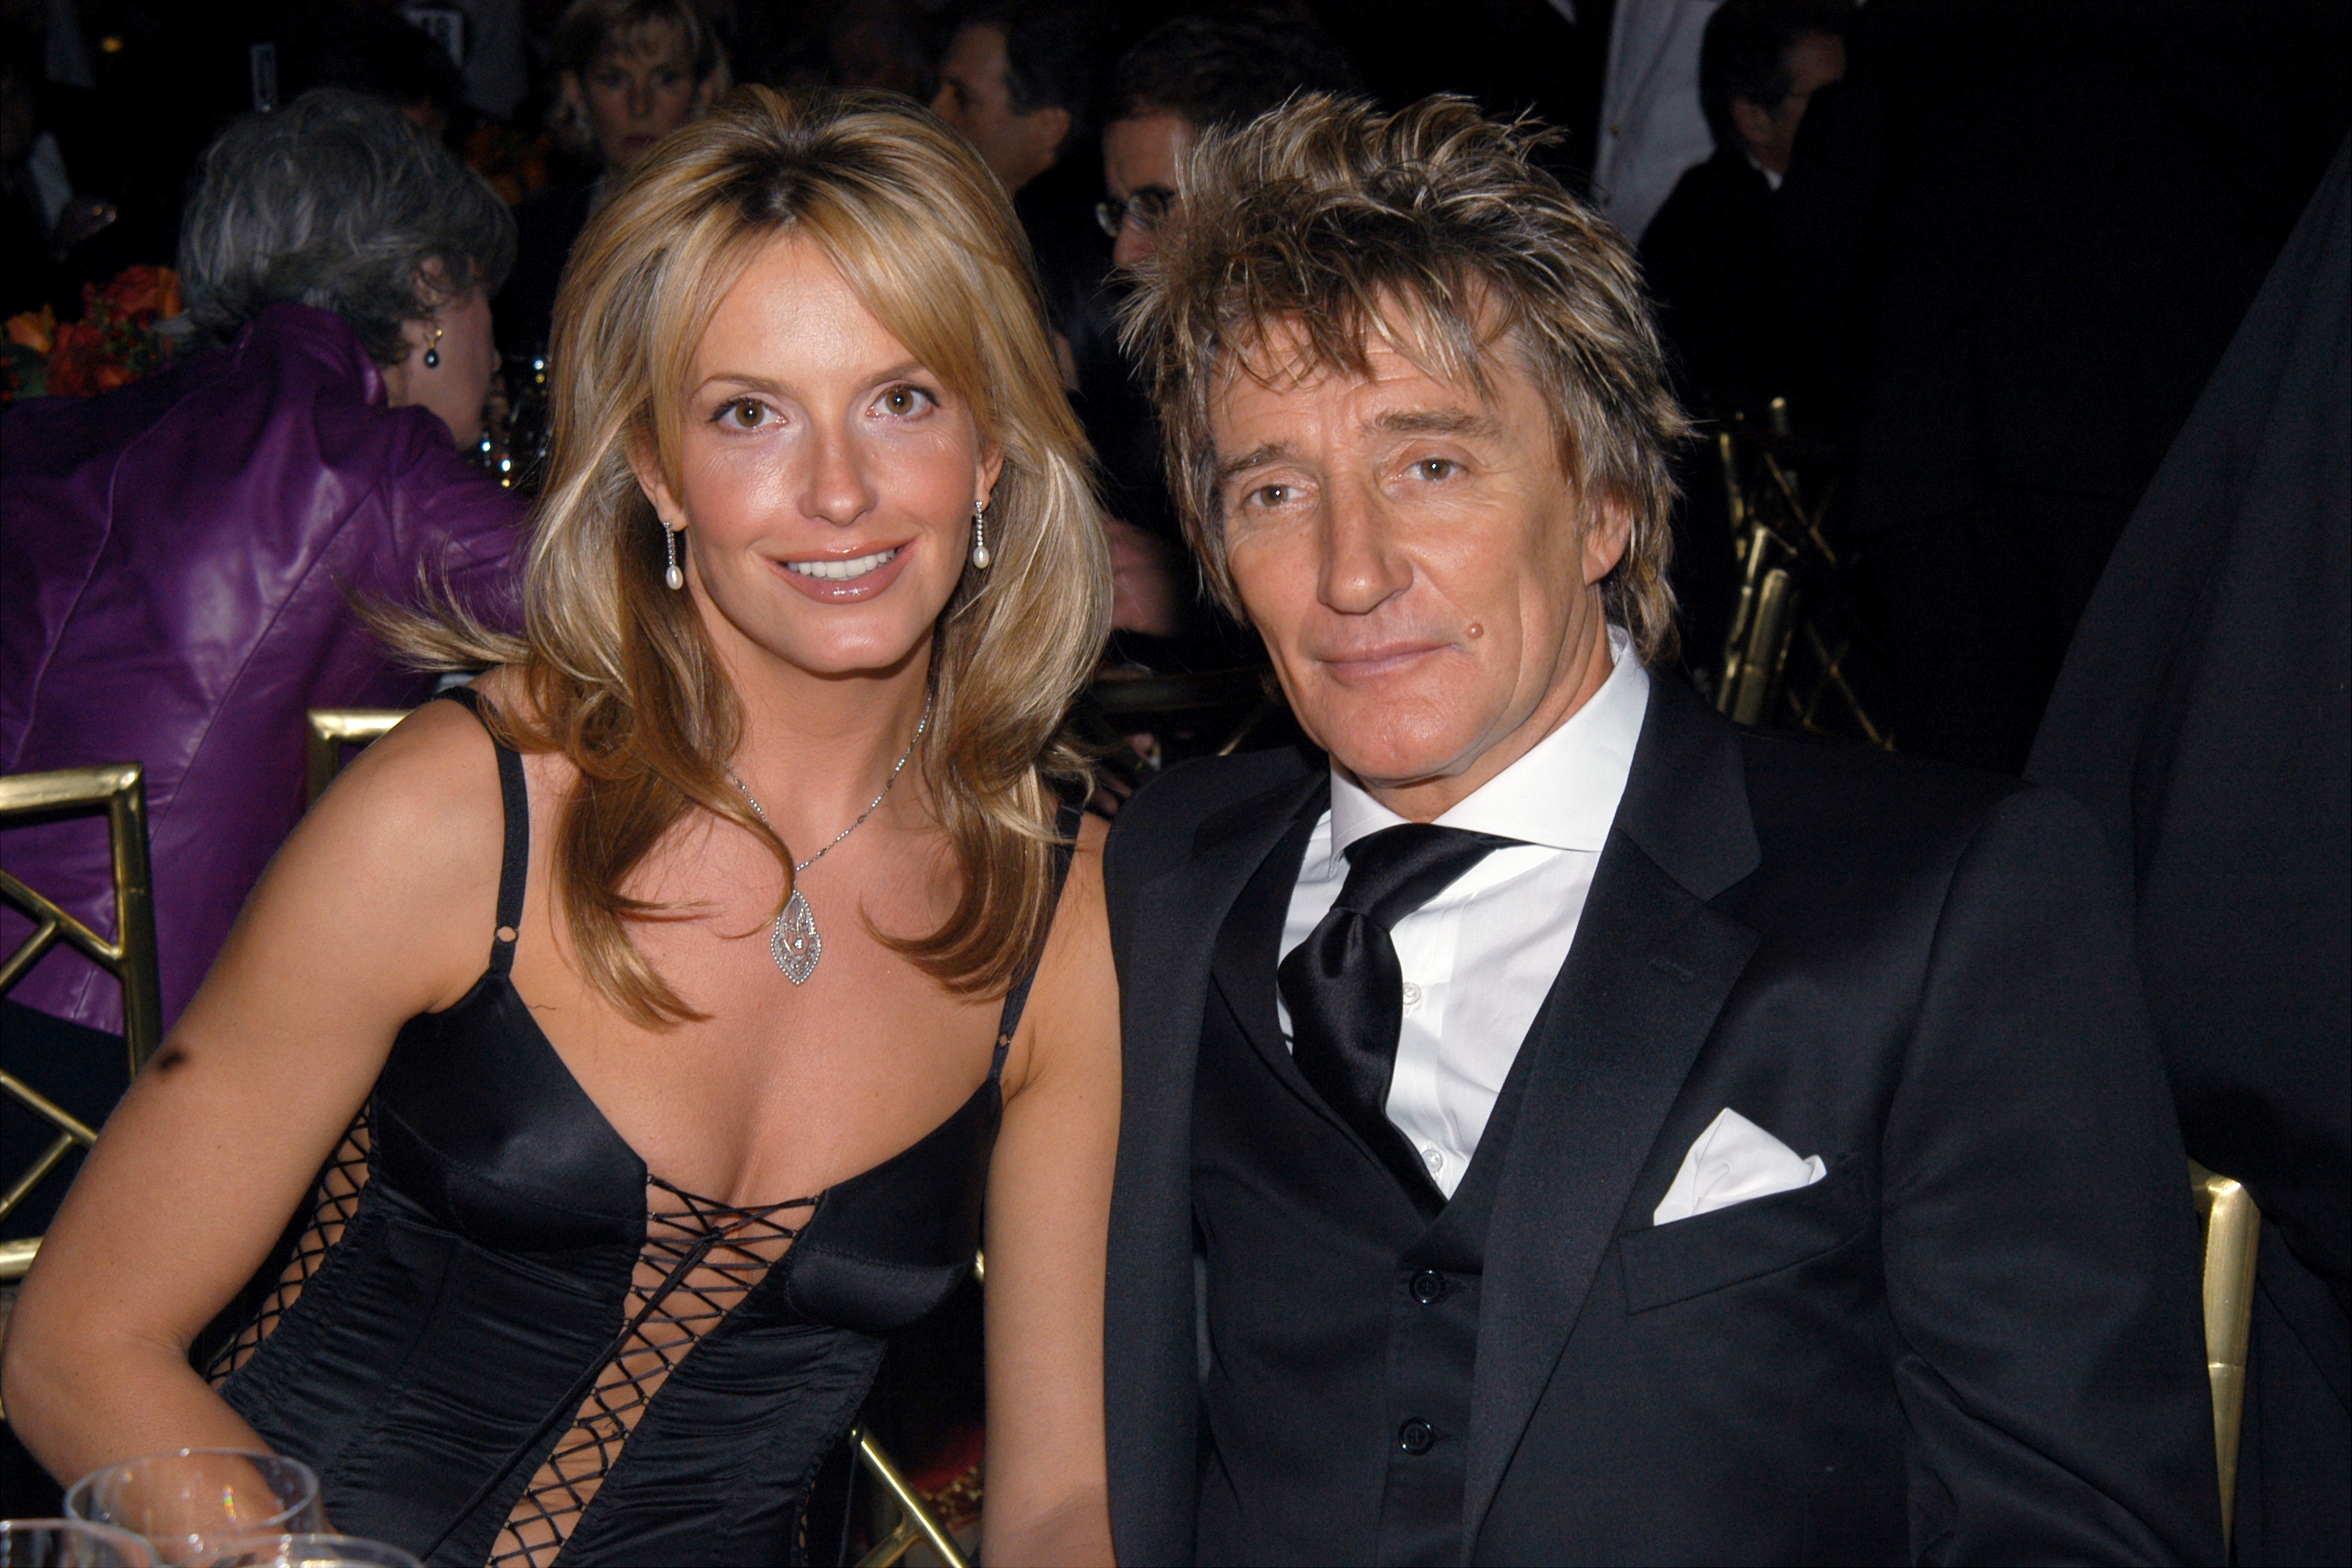 Penny Lancaster and Sir Rod Stewart at the pre-Grammy party in New York City on February 22, 2003 | Source: Getty Images